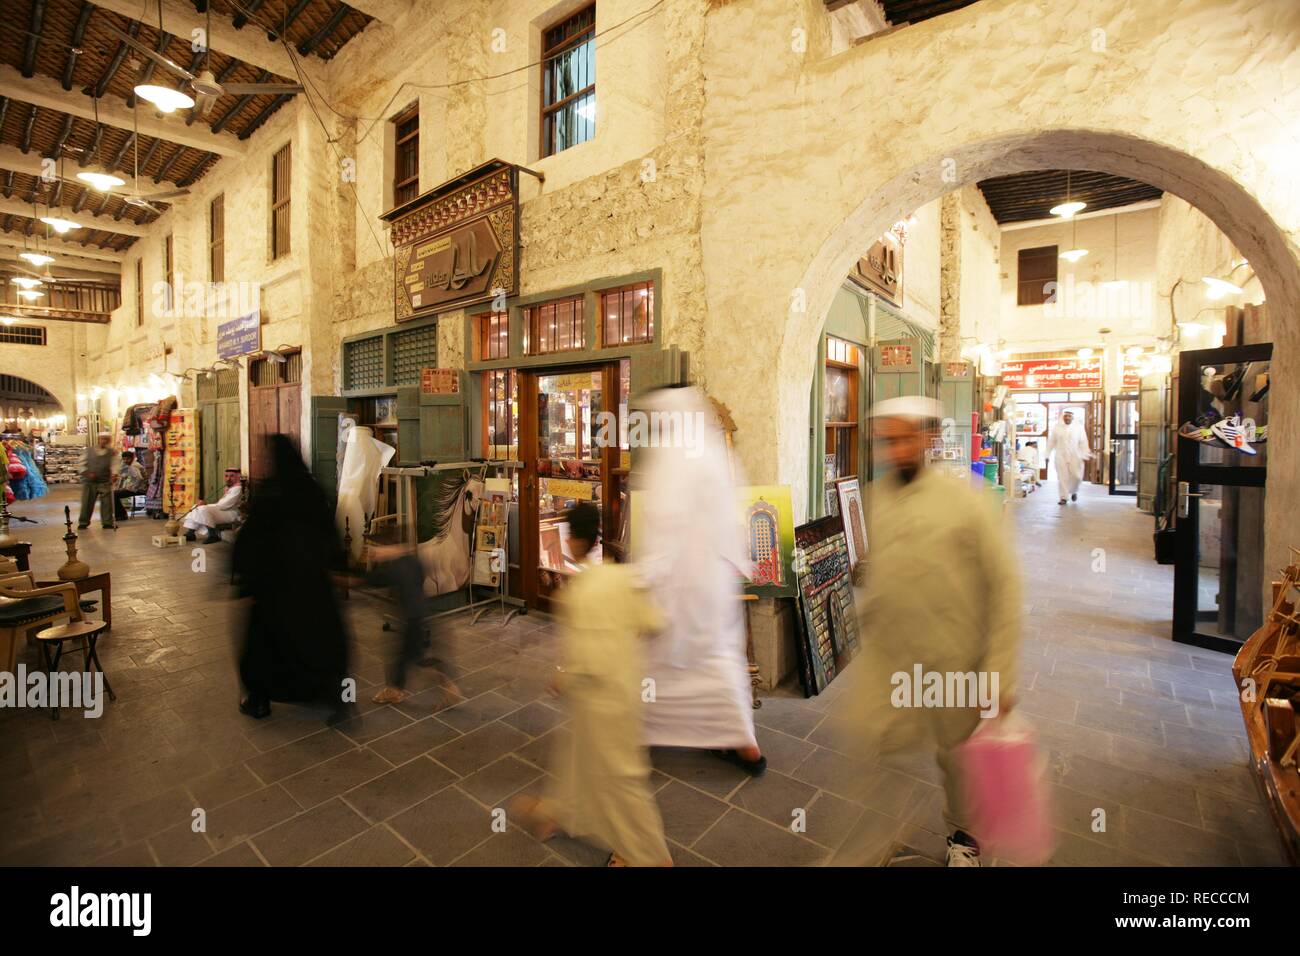 Men in a cafe in Souq al Waqif market, the oldest Souq or bazaar in the country, the old section has been recently renovated and Stock Photo